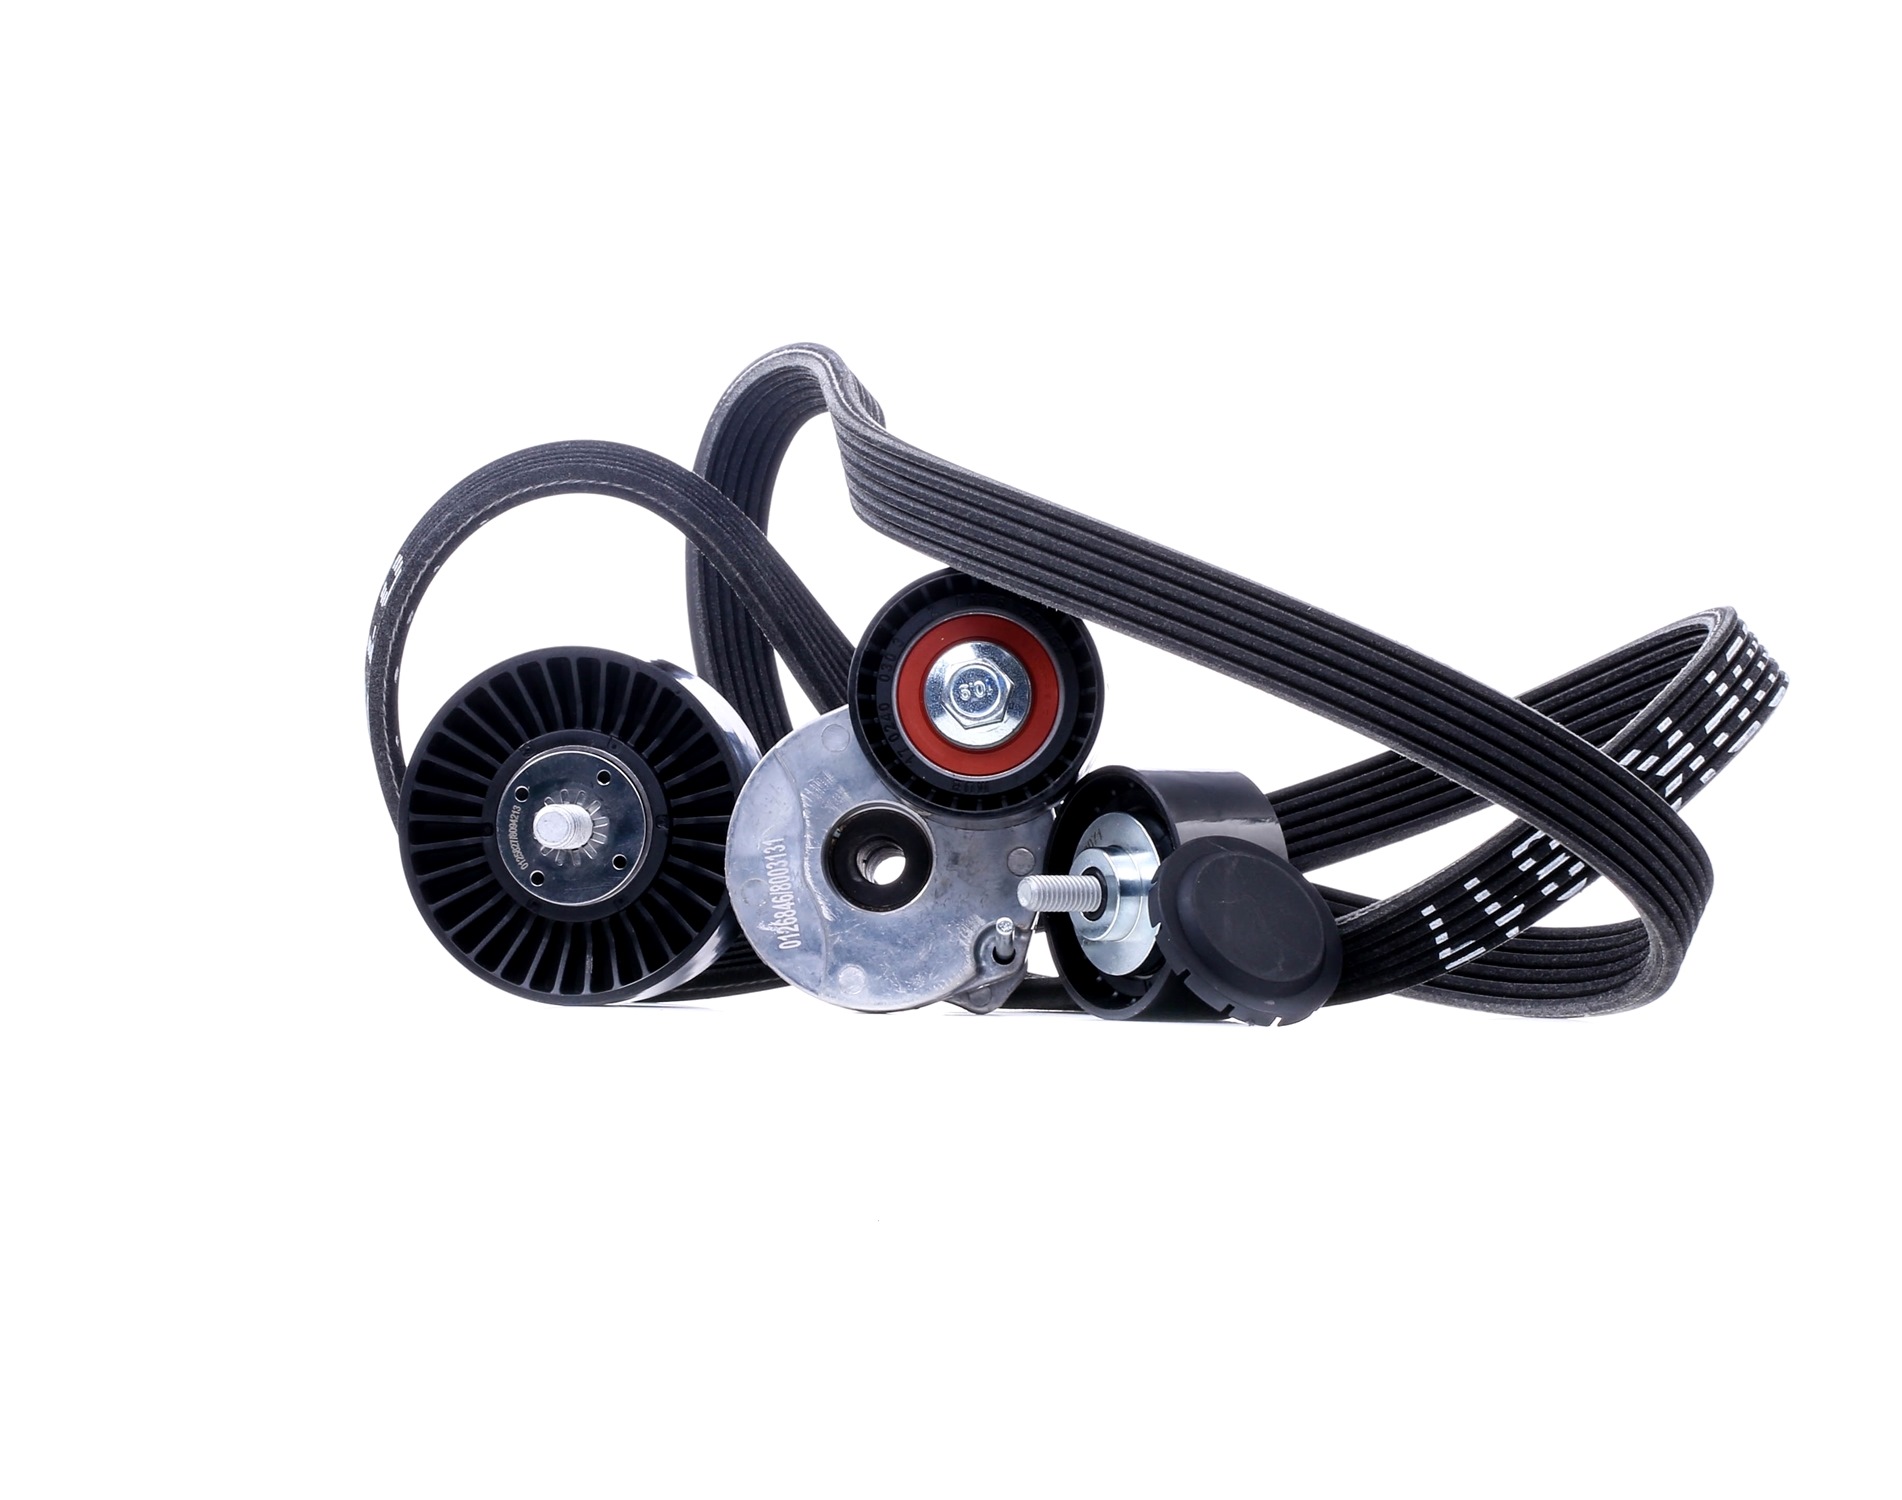 STARK Check alternator freewheel clutch & replace if necessary Length: 1817mm, Number of ribs: 6 Serpentine belt kit SKRBS-1200396 buy